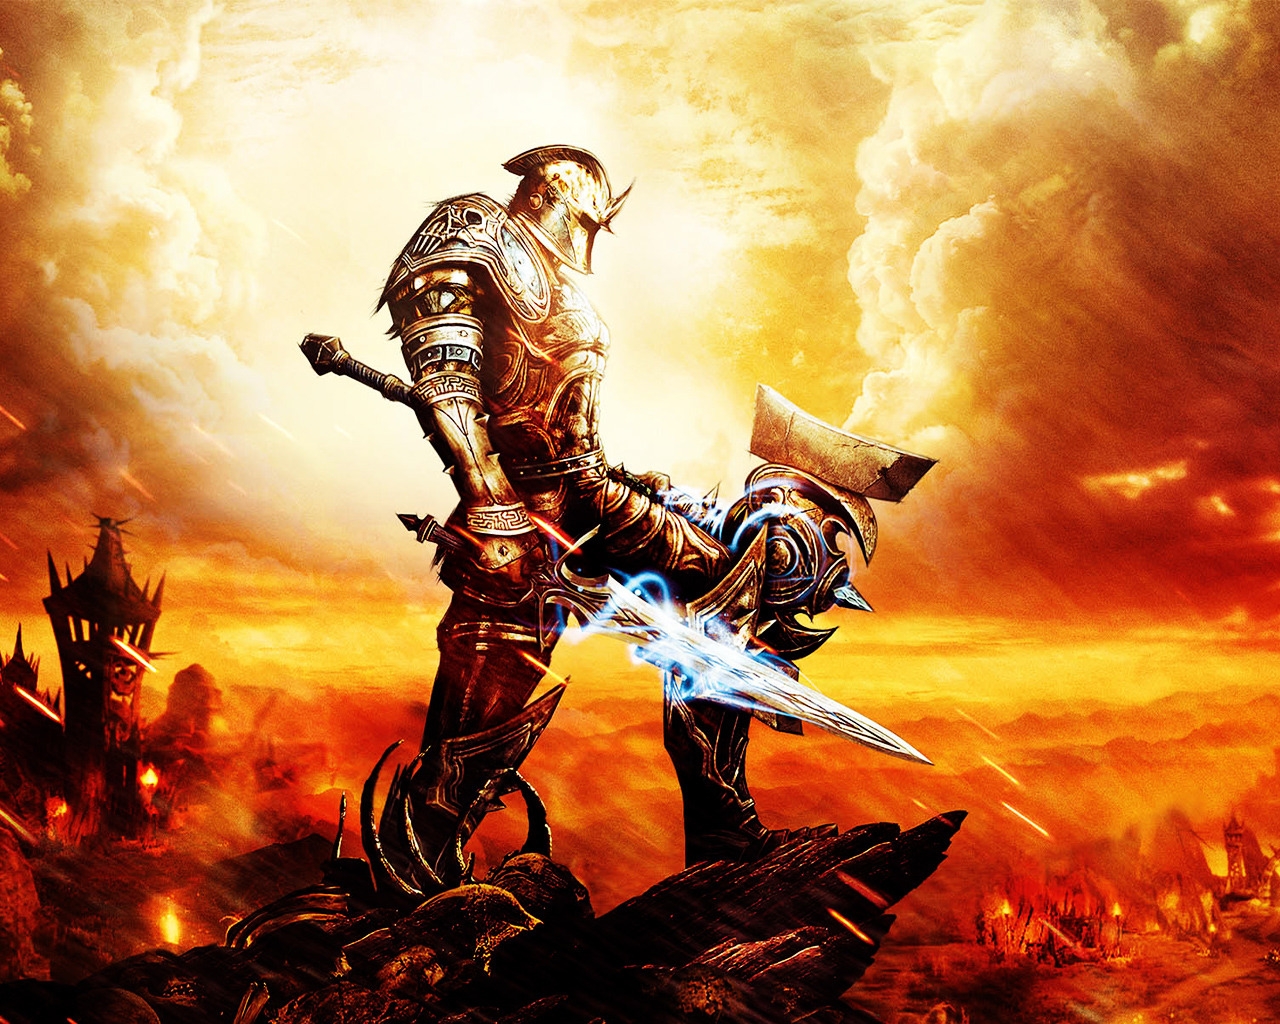 Kingdoms of Amalur Reckoning for 1280 x 1024 resolution